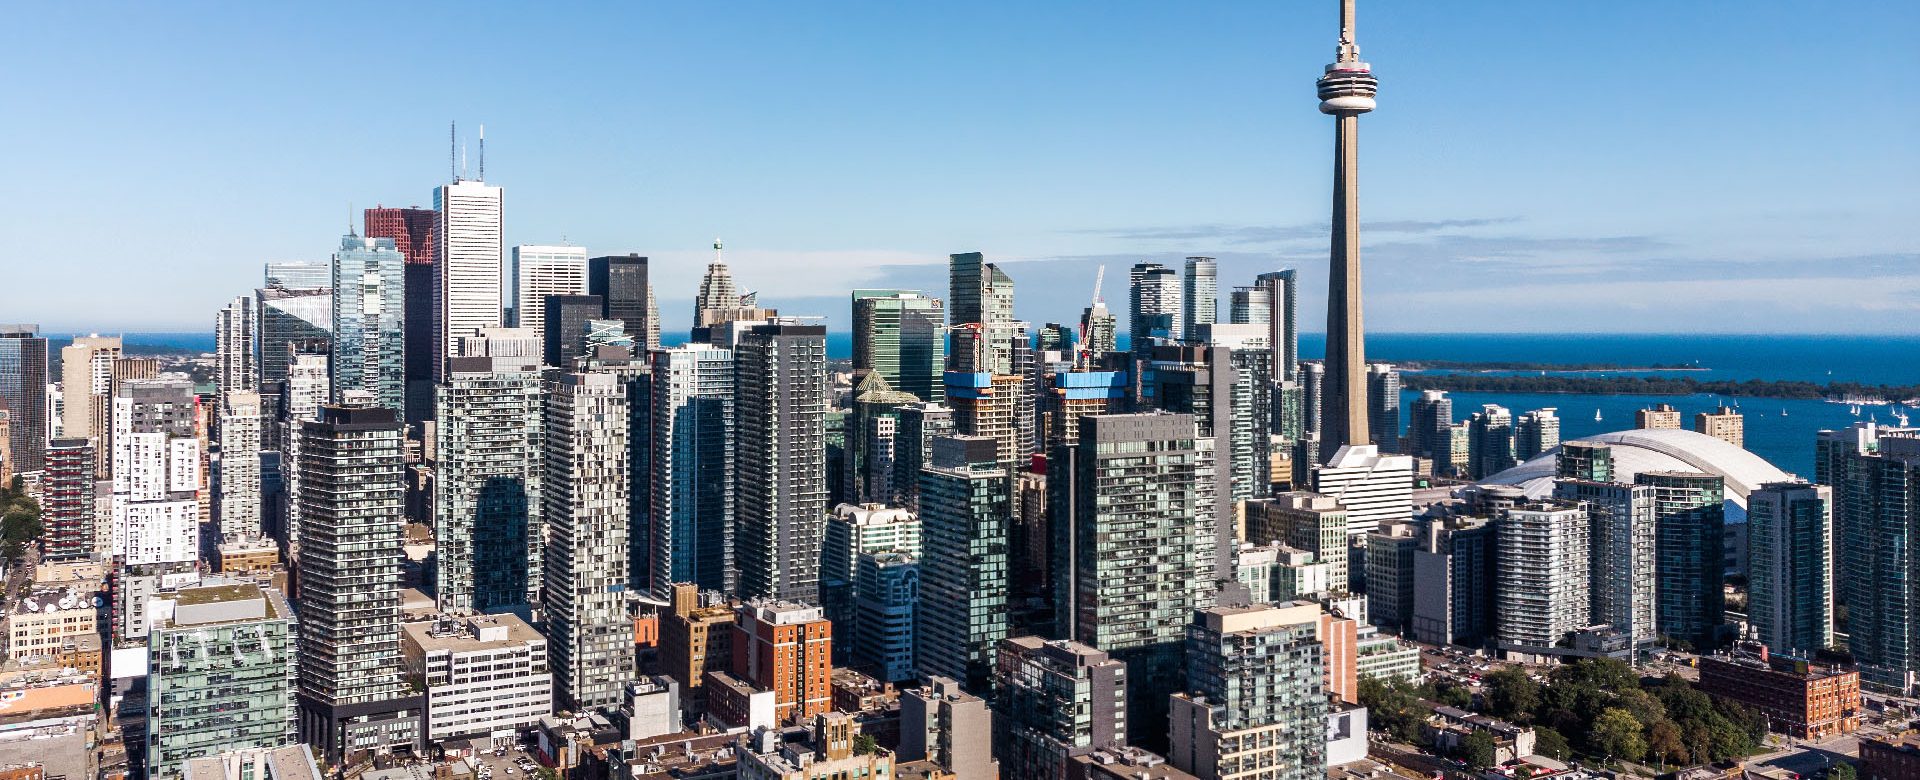 Aerial view of Downtown Toronto including architectural landmark CN Tower in Toronto, Ontario, Canada.